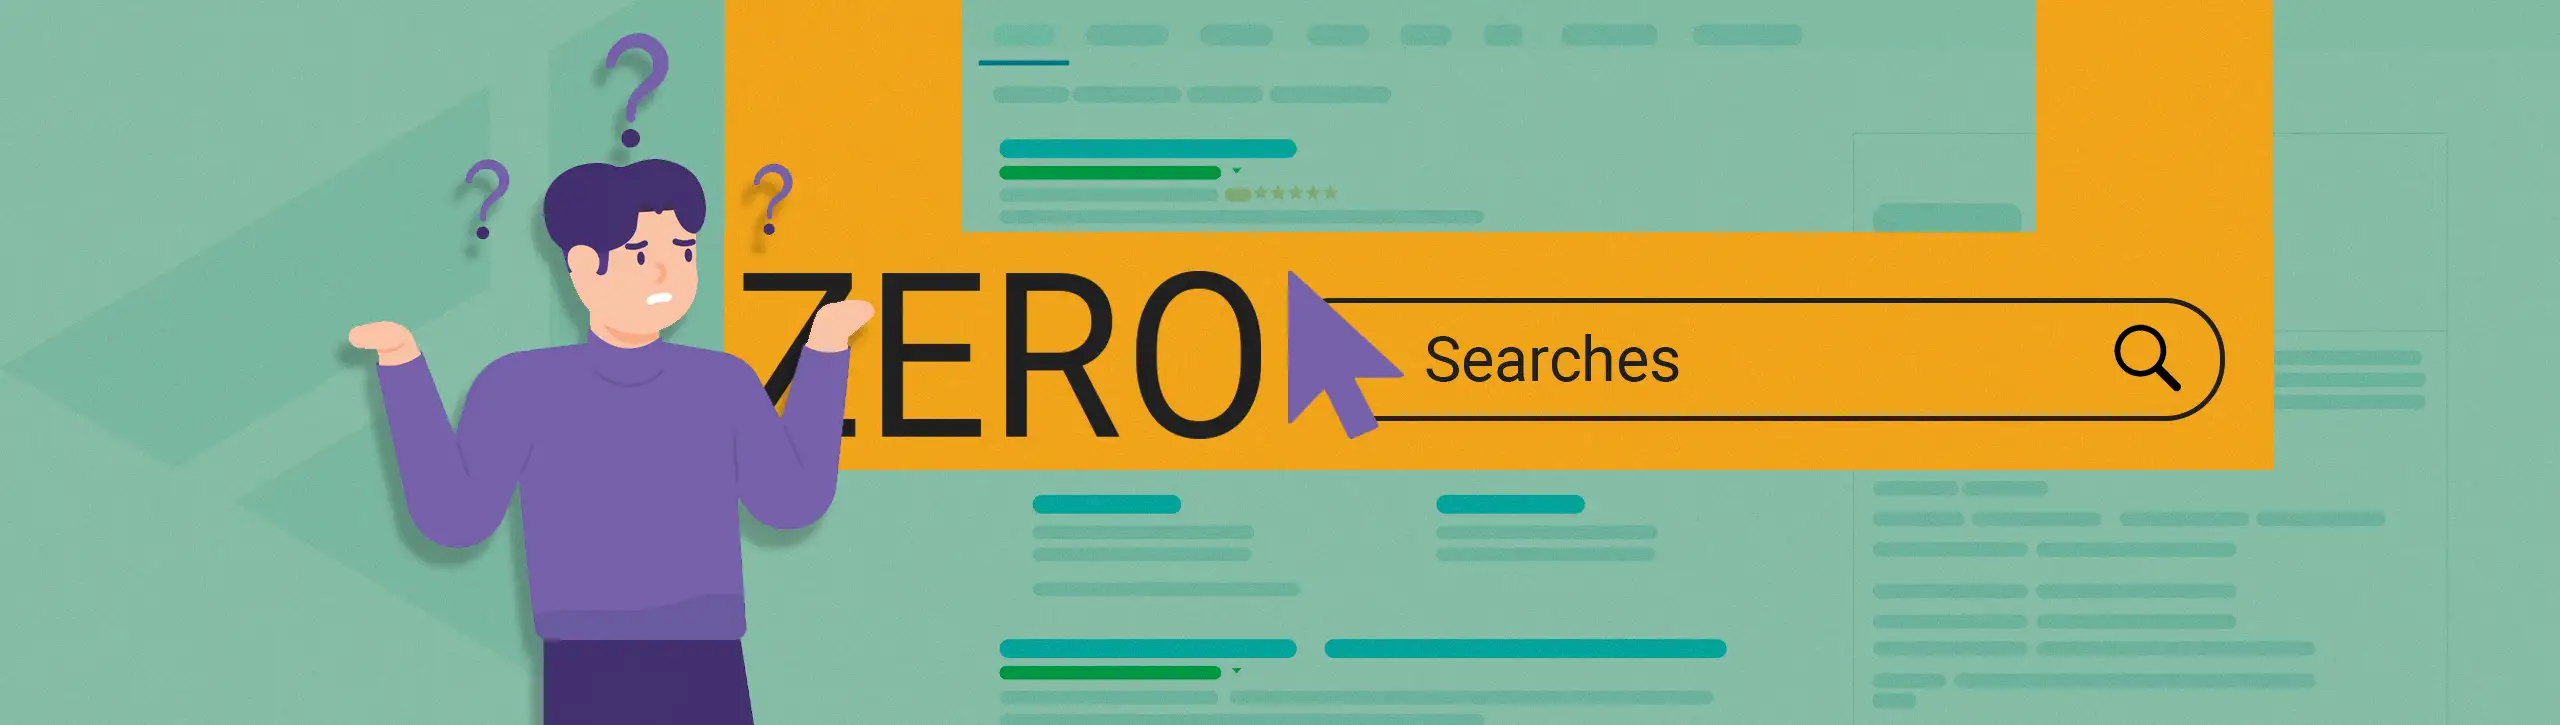 What Are Zero-Click Searches and Why Should You Care?